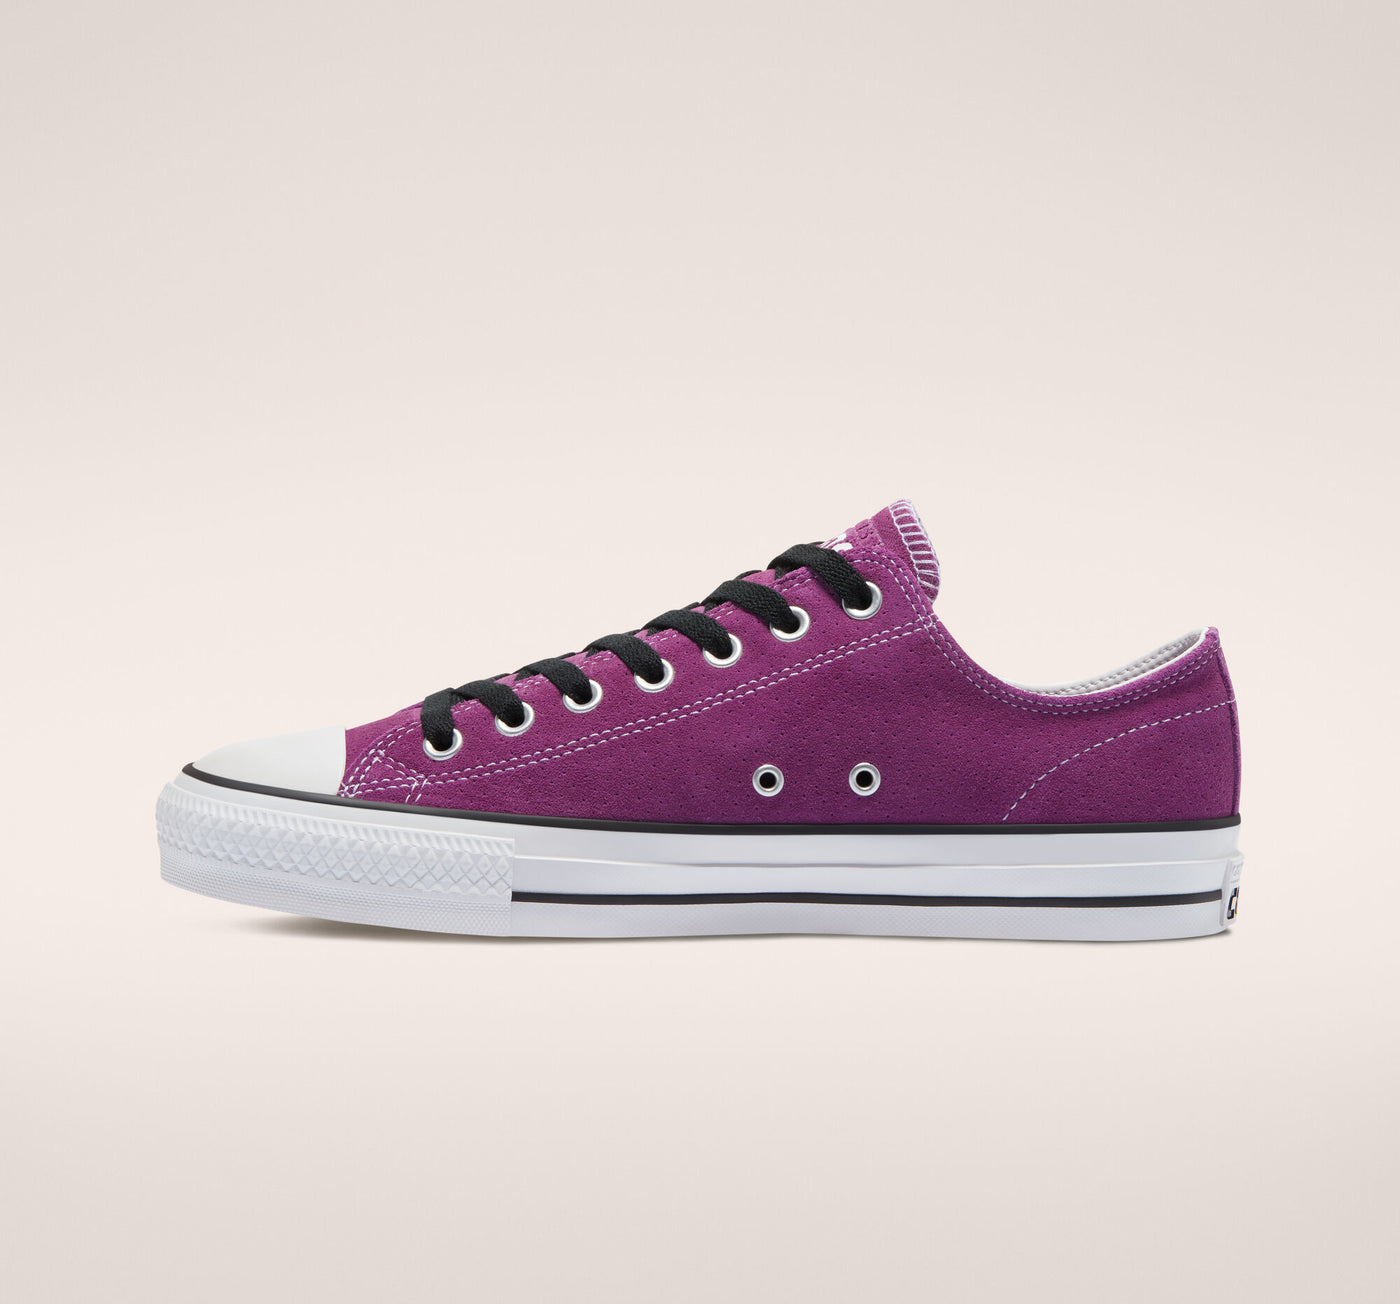 Converse Cons - CHUCK TAYLOR ALL STAR PRO LOW NIGHTFALL VIOLET/BLACK/WHITE